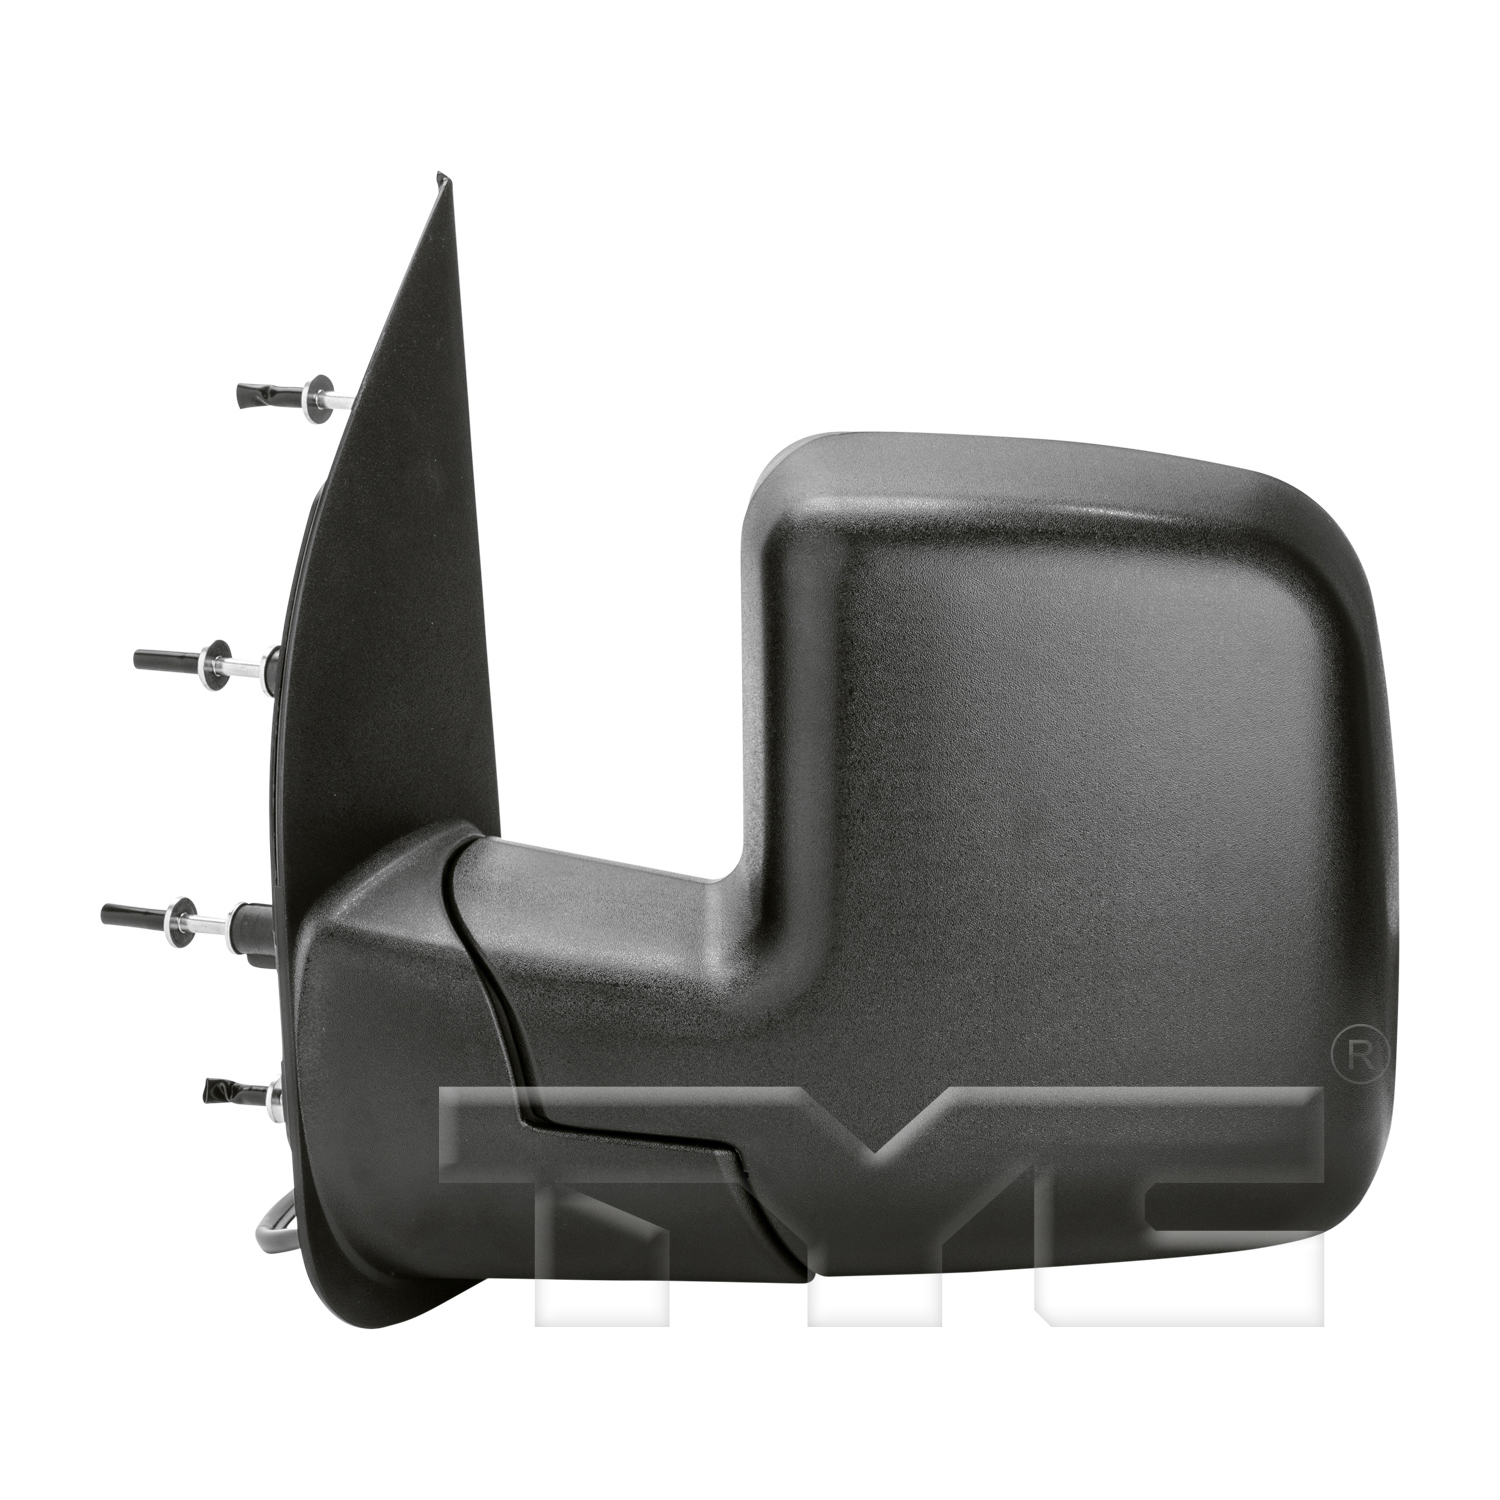 Aftermarket MIRRORS for FORD - E-150, E-150,03-06,LT Mirror outside rear view